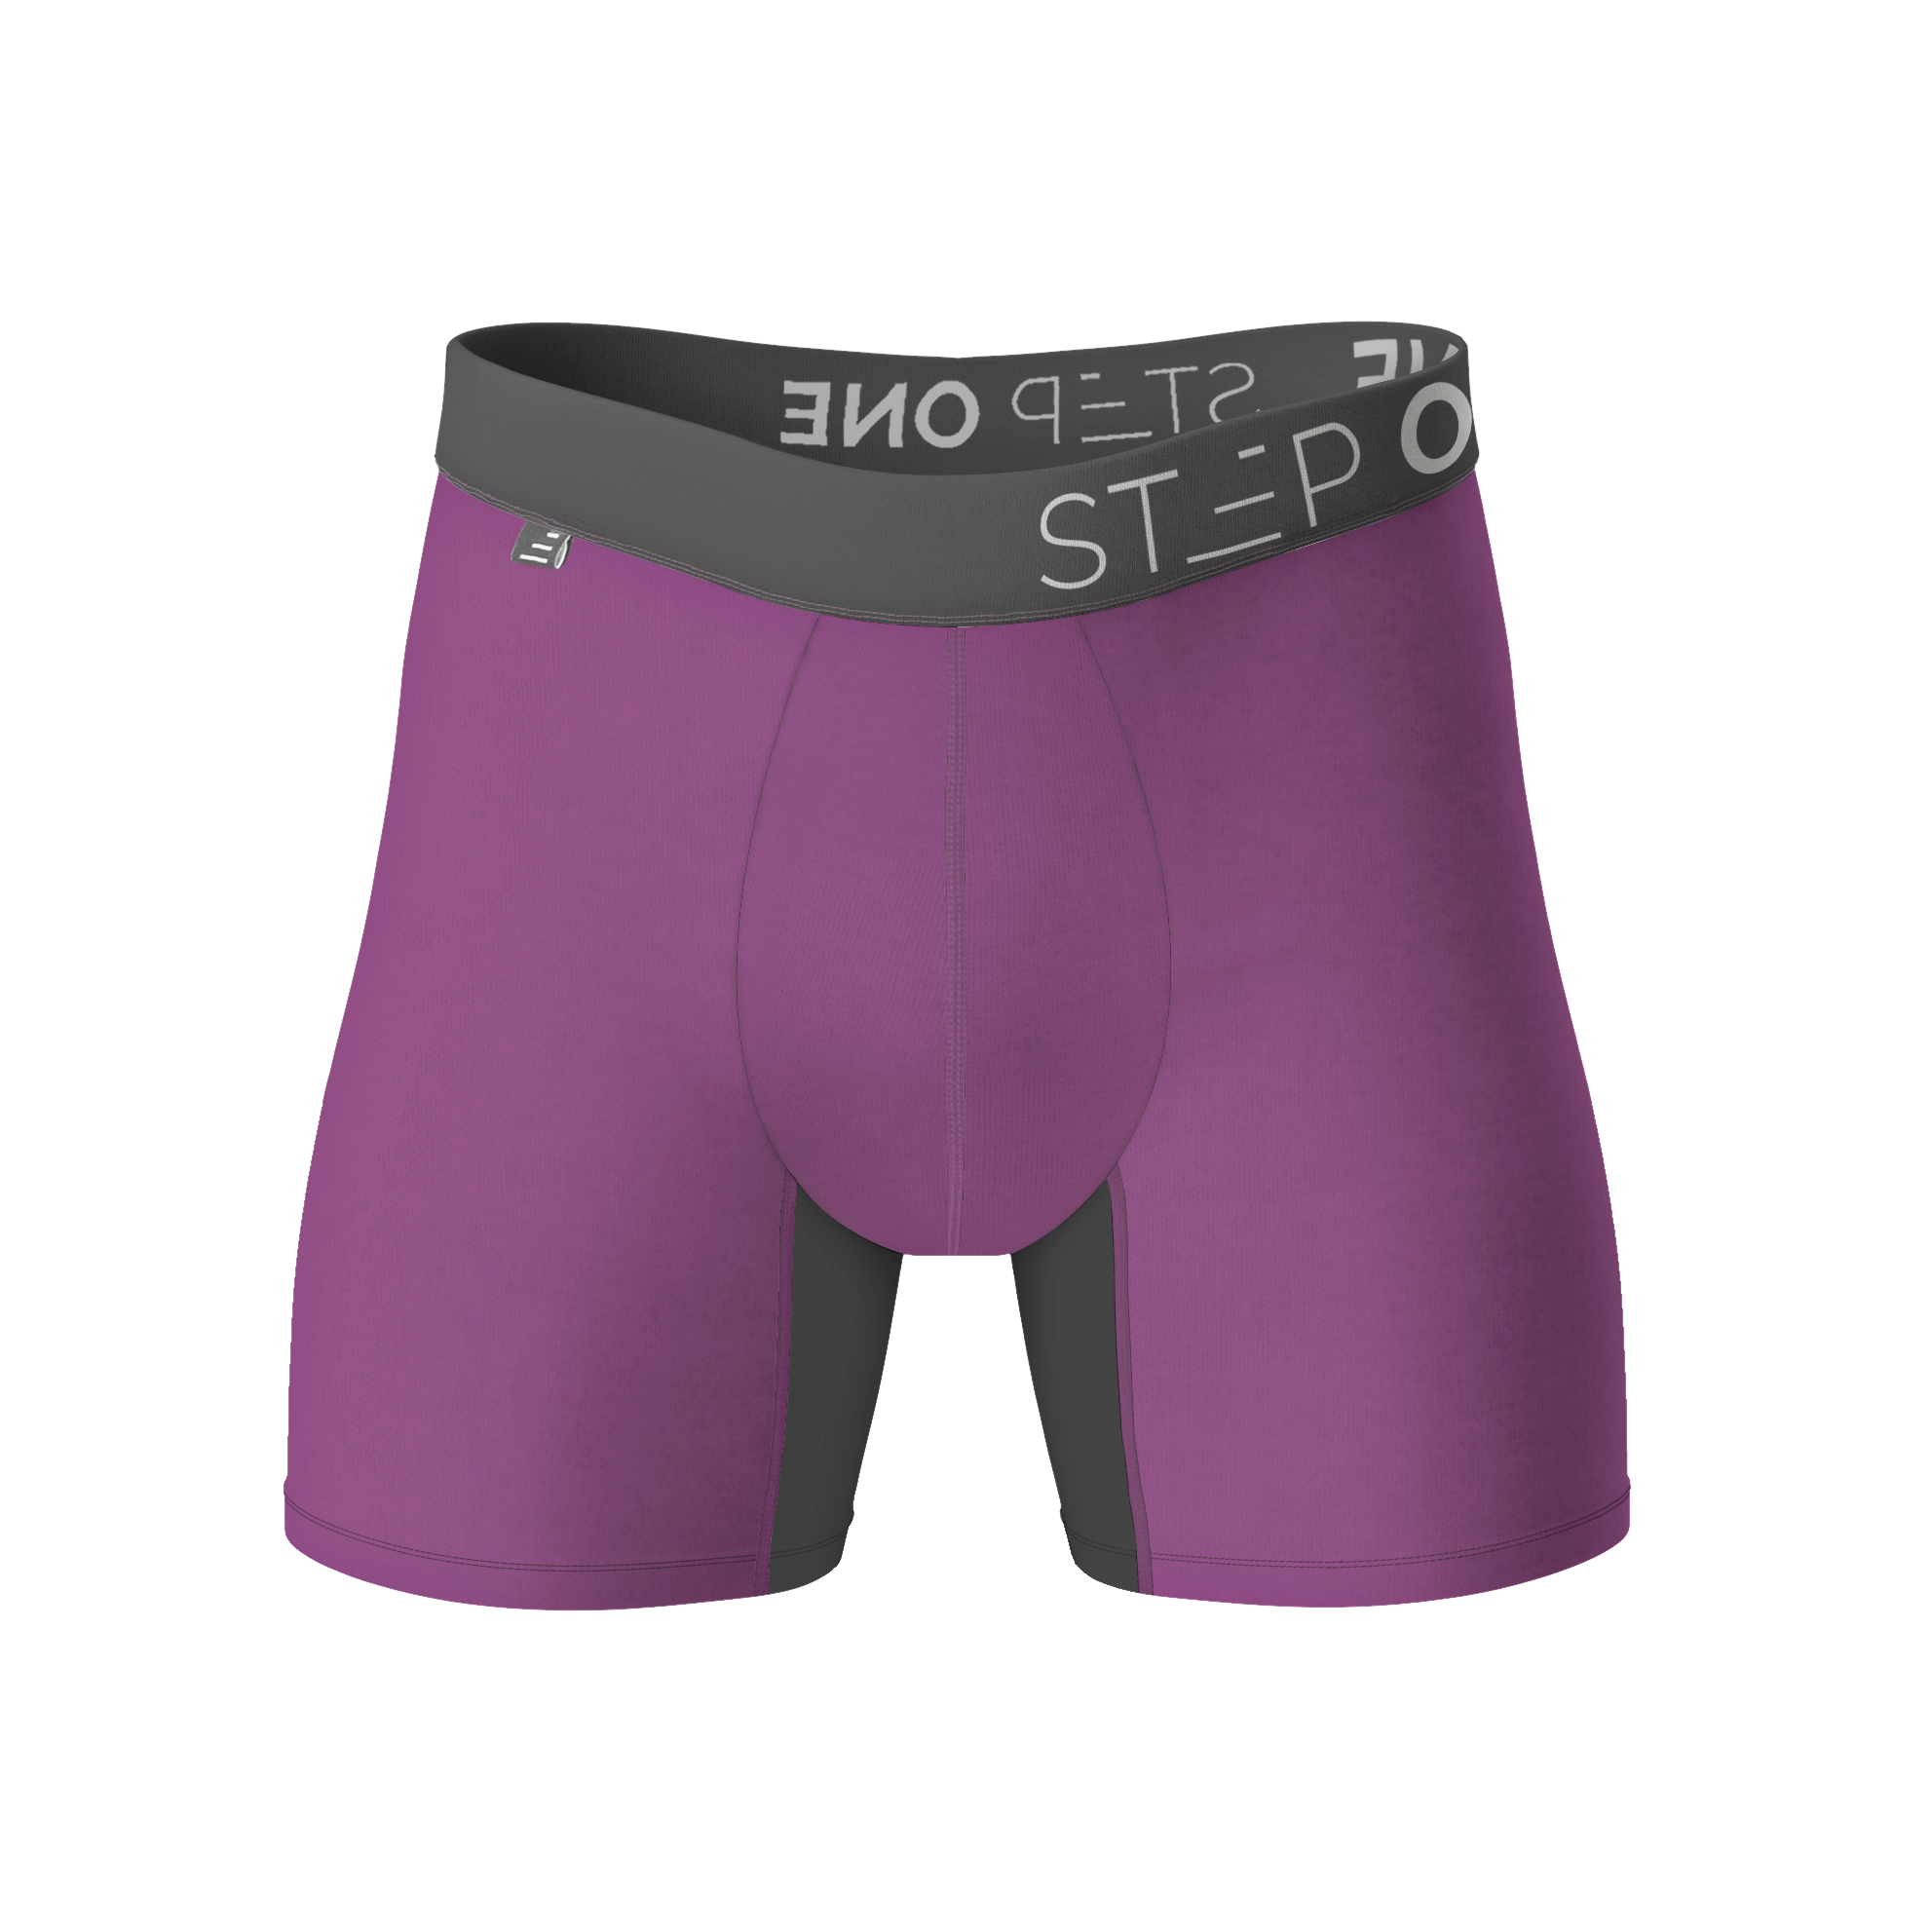 Boxer Brief - Juicy Plums product